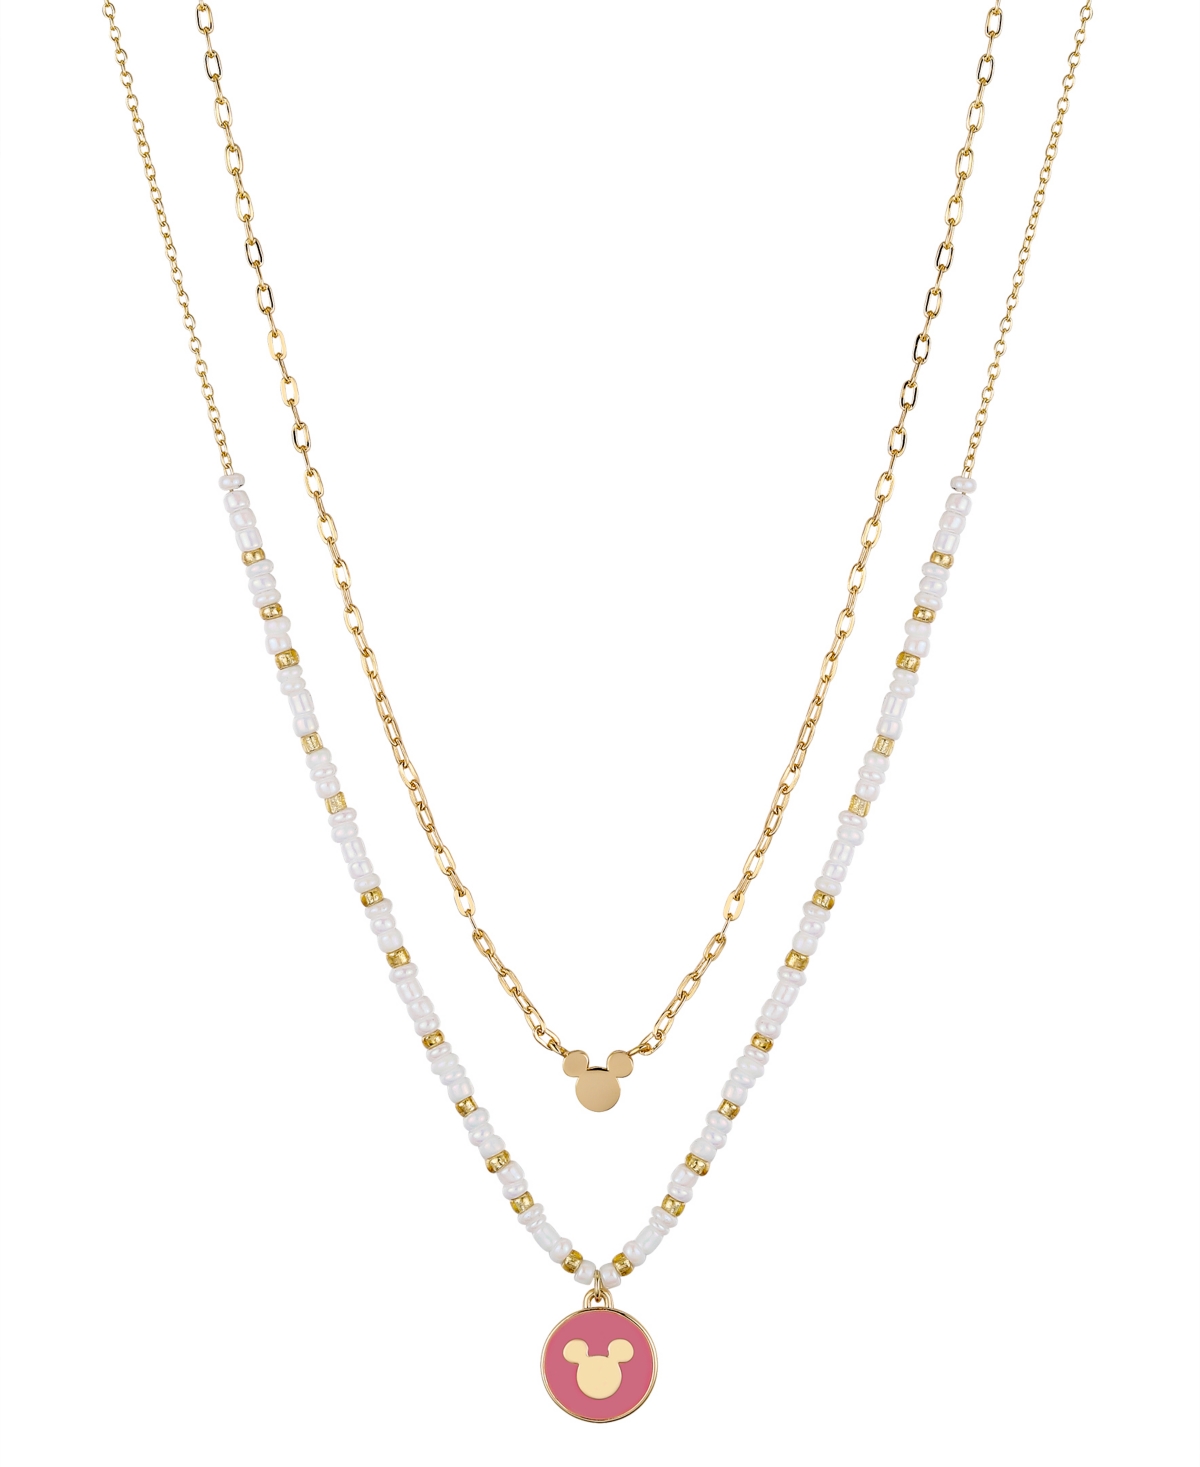 Disney 14k Gold Plated Mickey Mouse Pink Charm White Beaded And Link Chain Necklace Set, 2 Piece